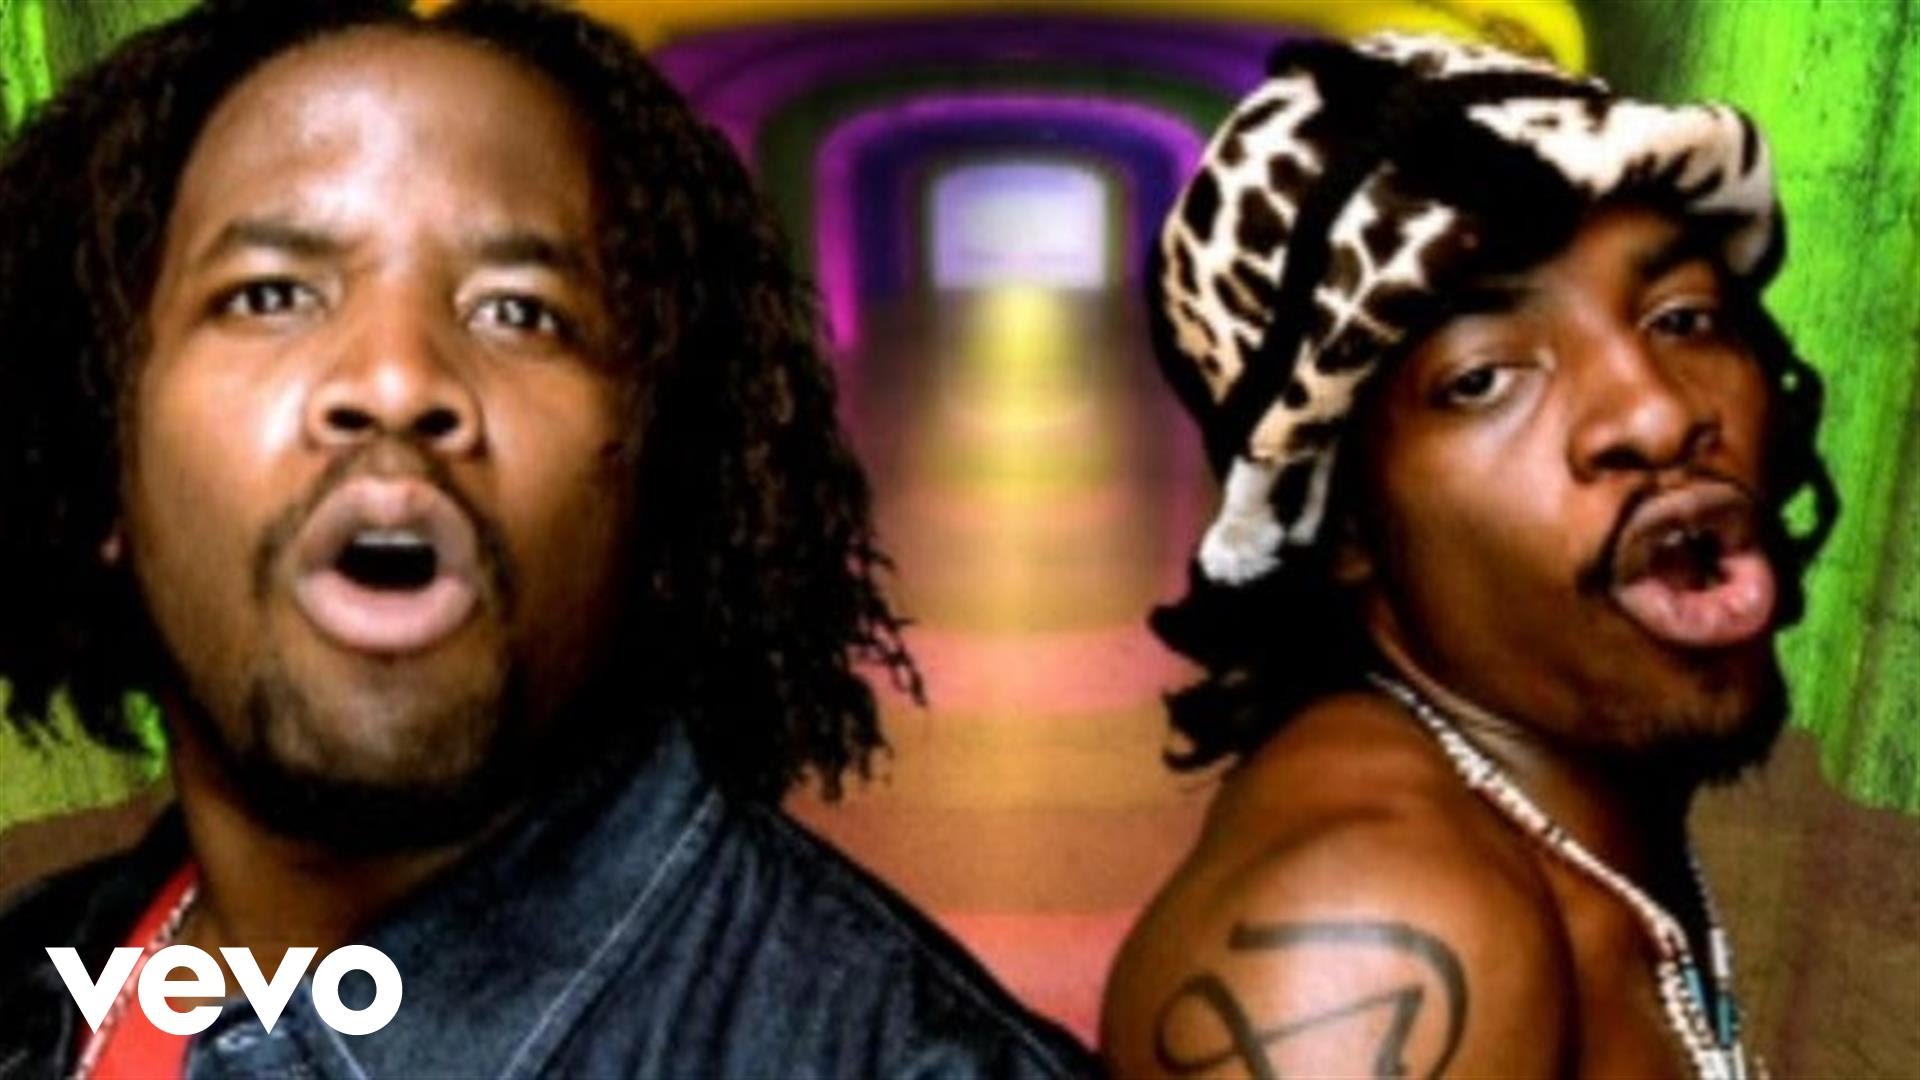 Amazing Outkast Pictures & Backgrounds